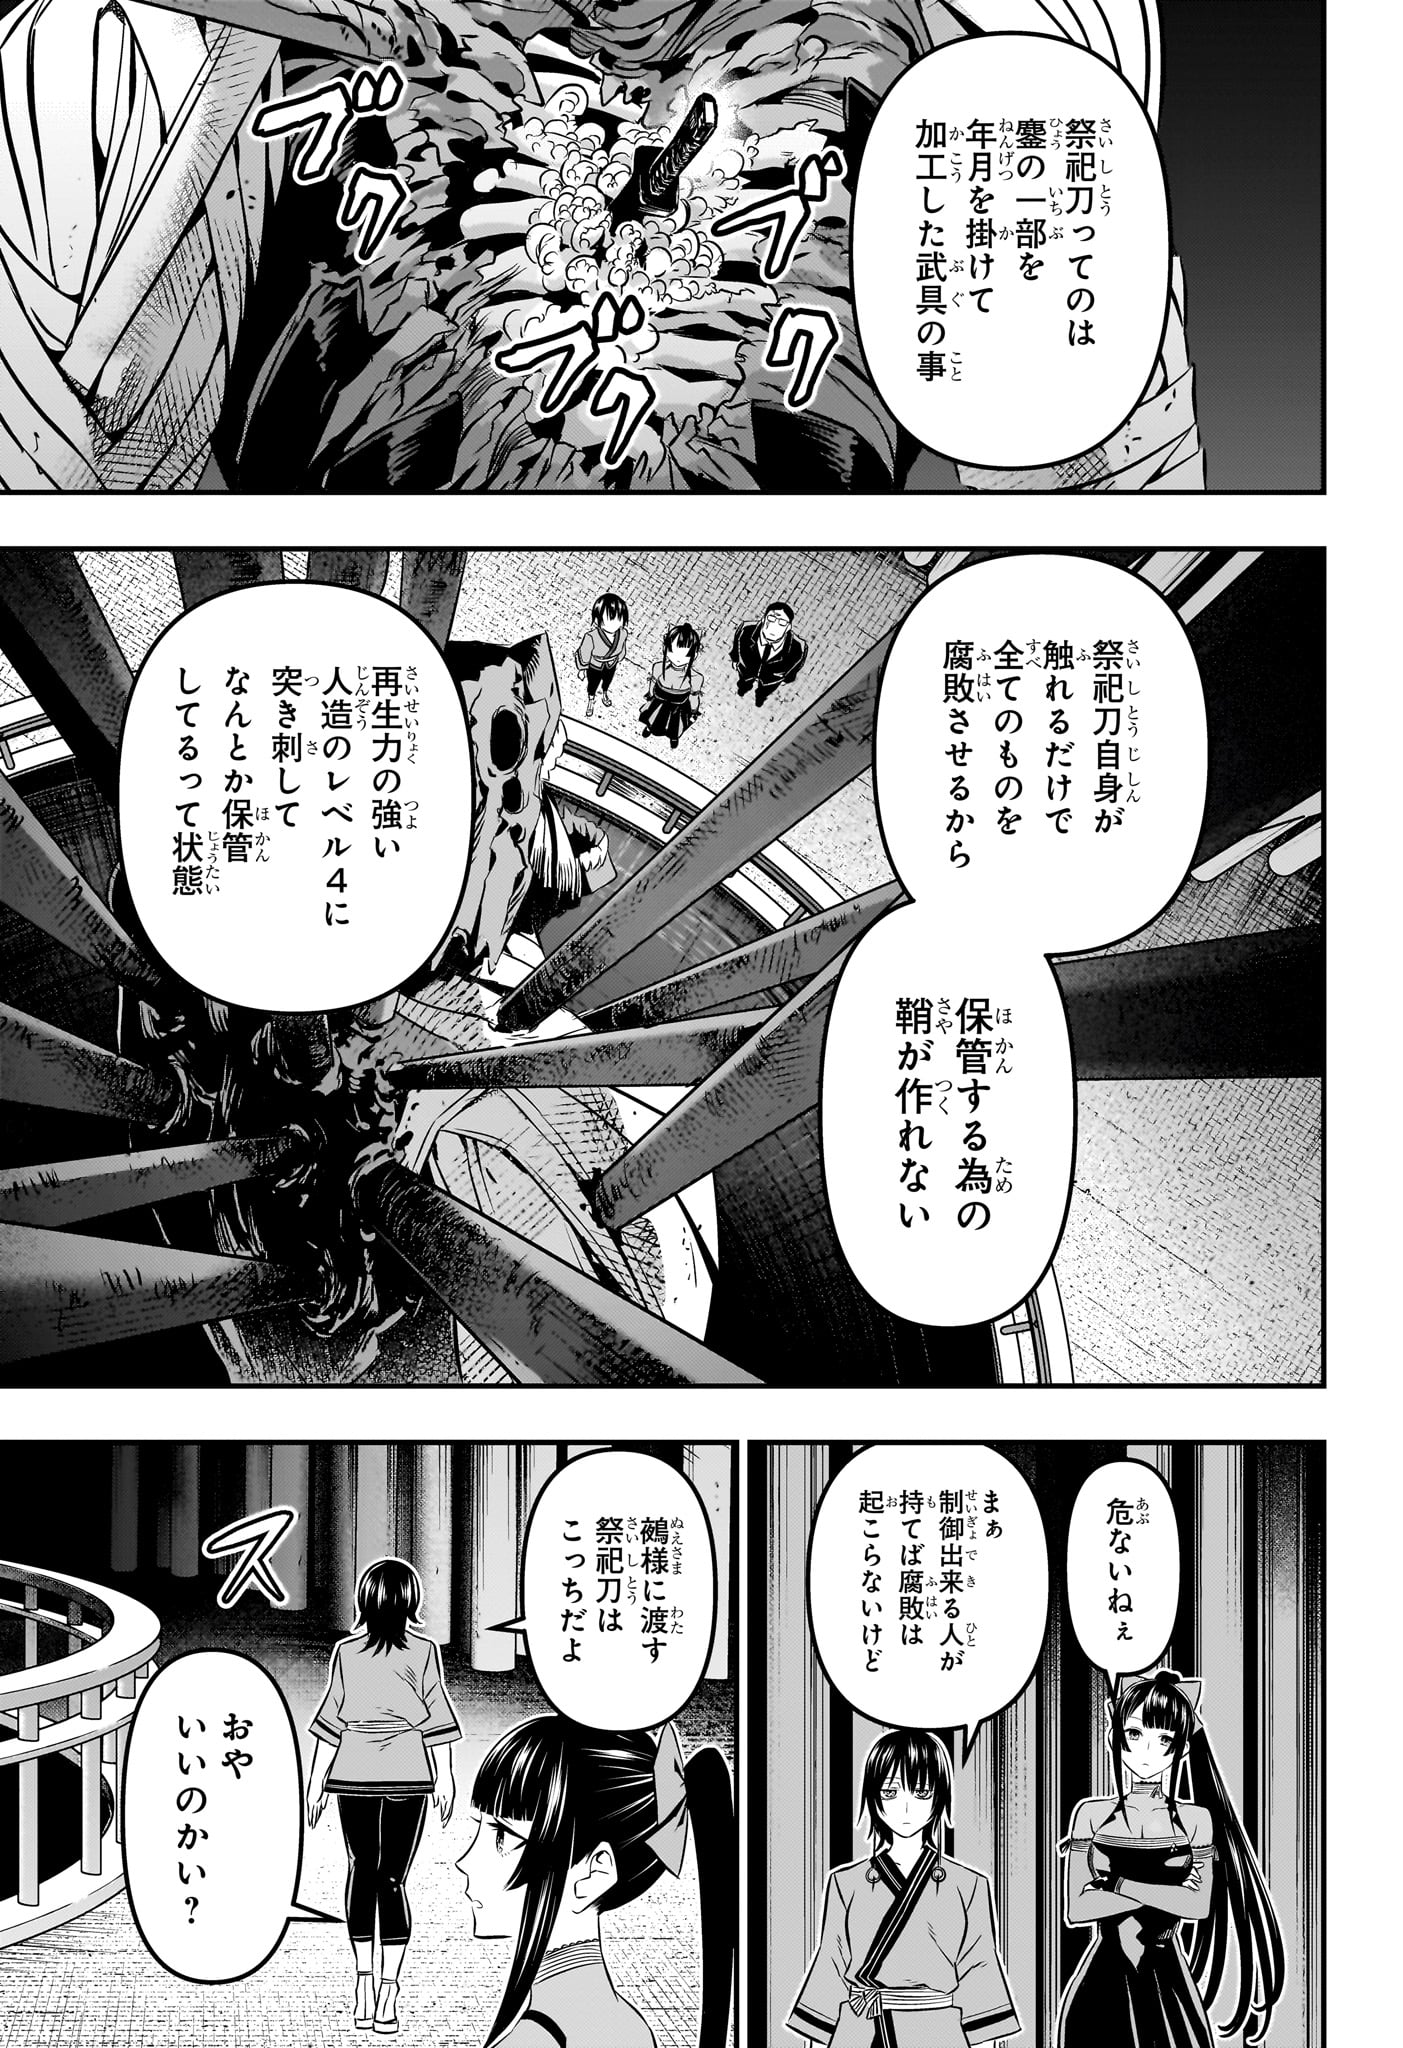 Nue no Onmyouji - Chapter 49 - Page 7